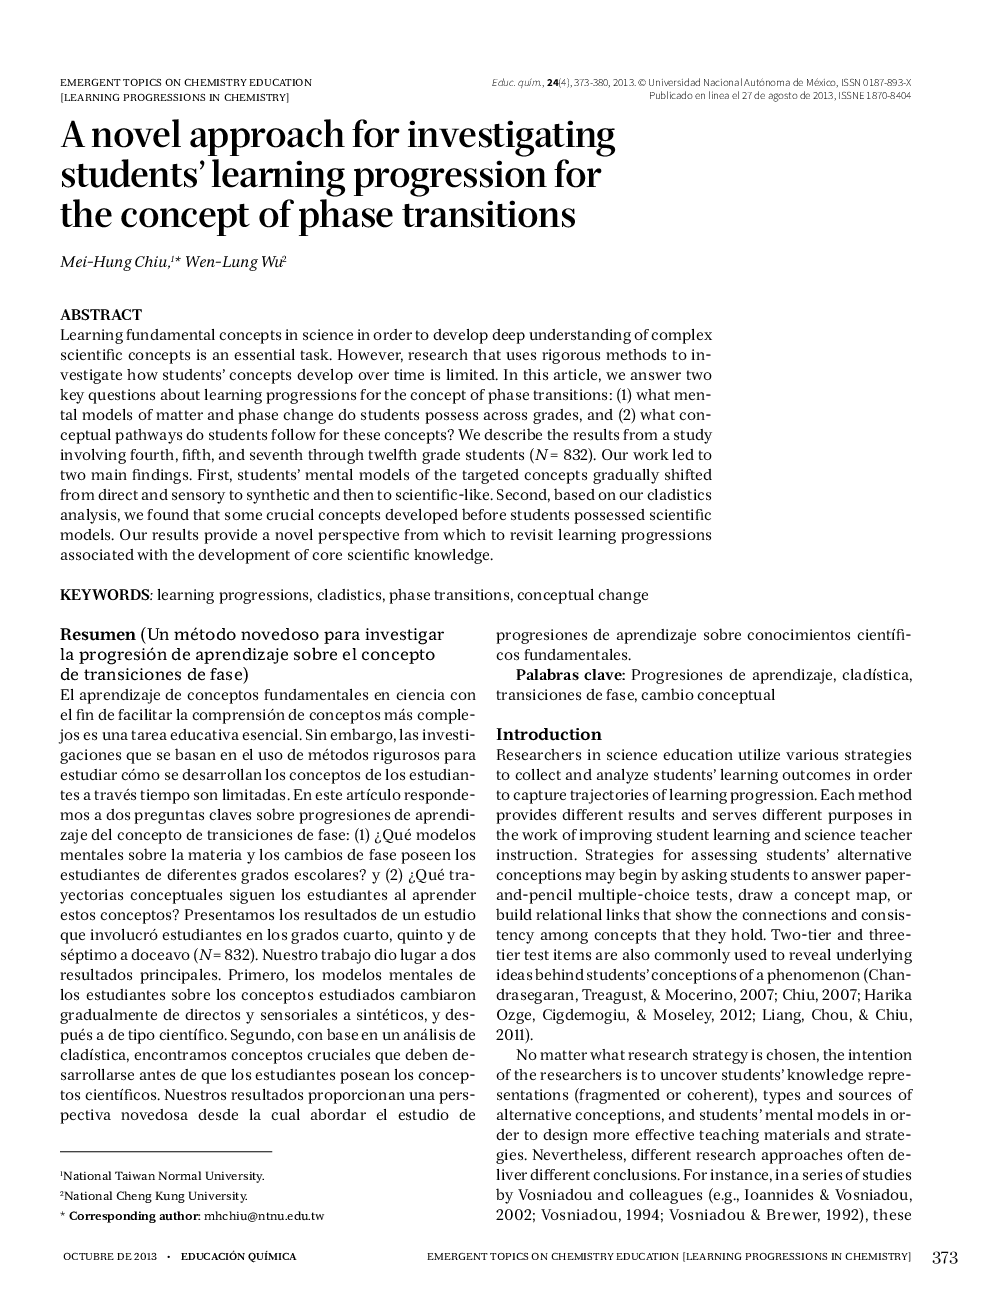 A novel approach for investigating students’ learning progression for the concept of phase transitions